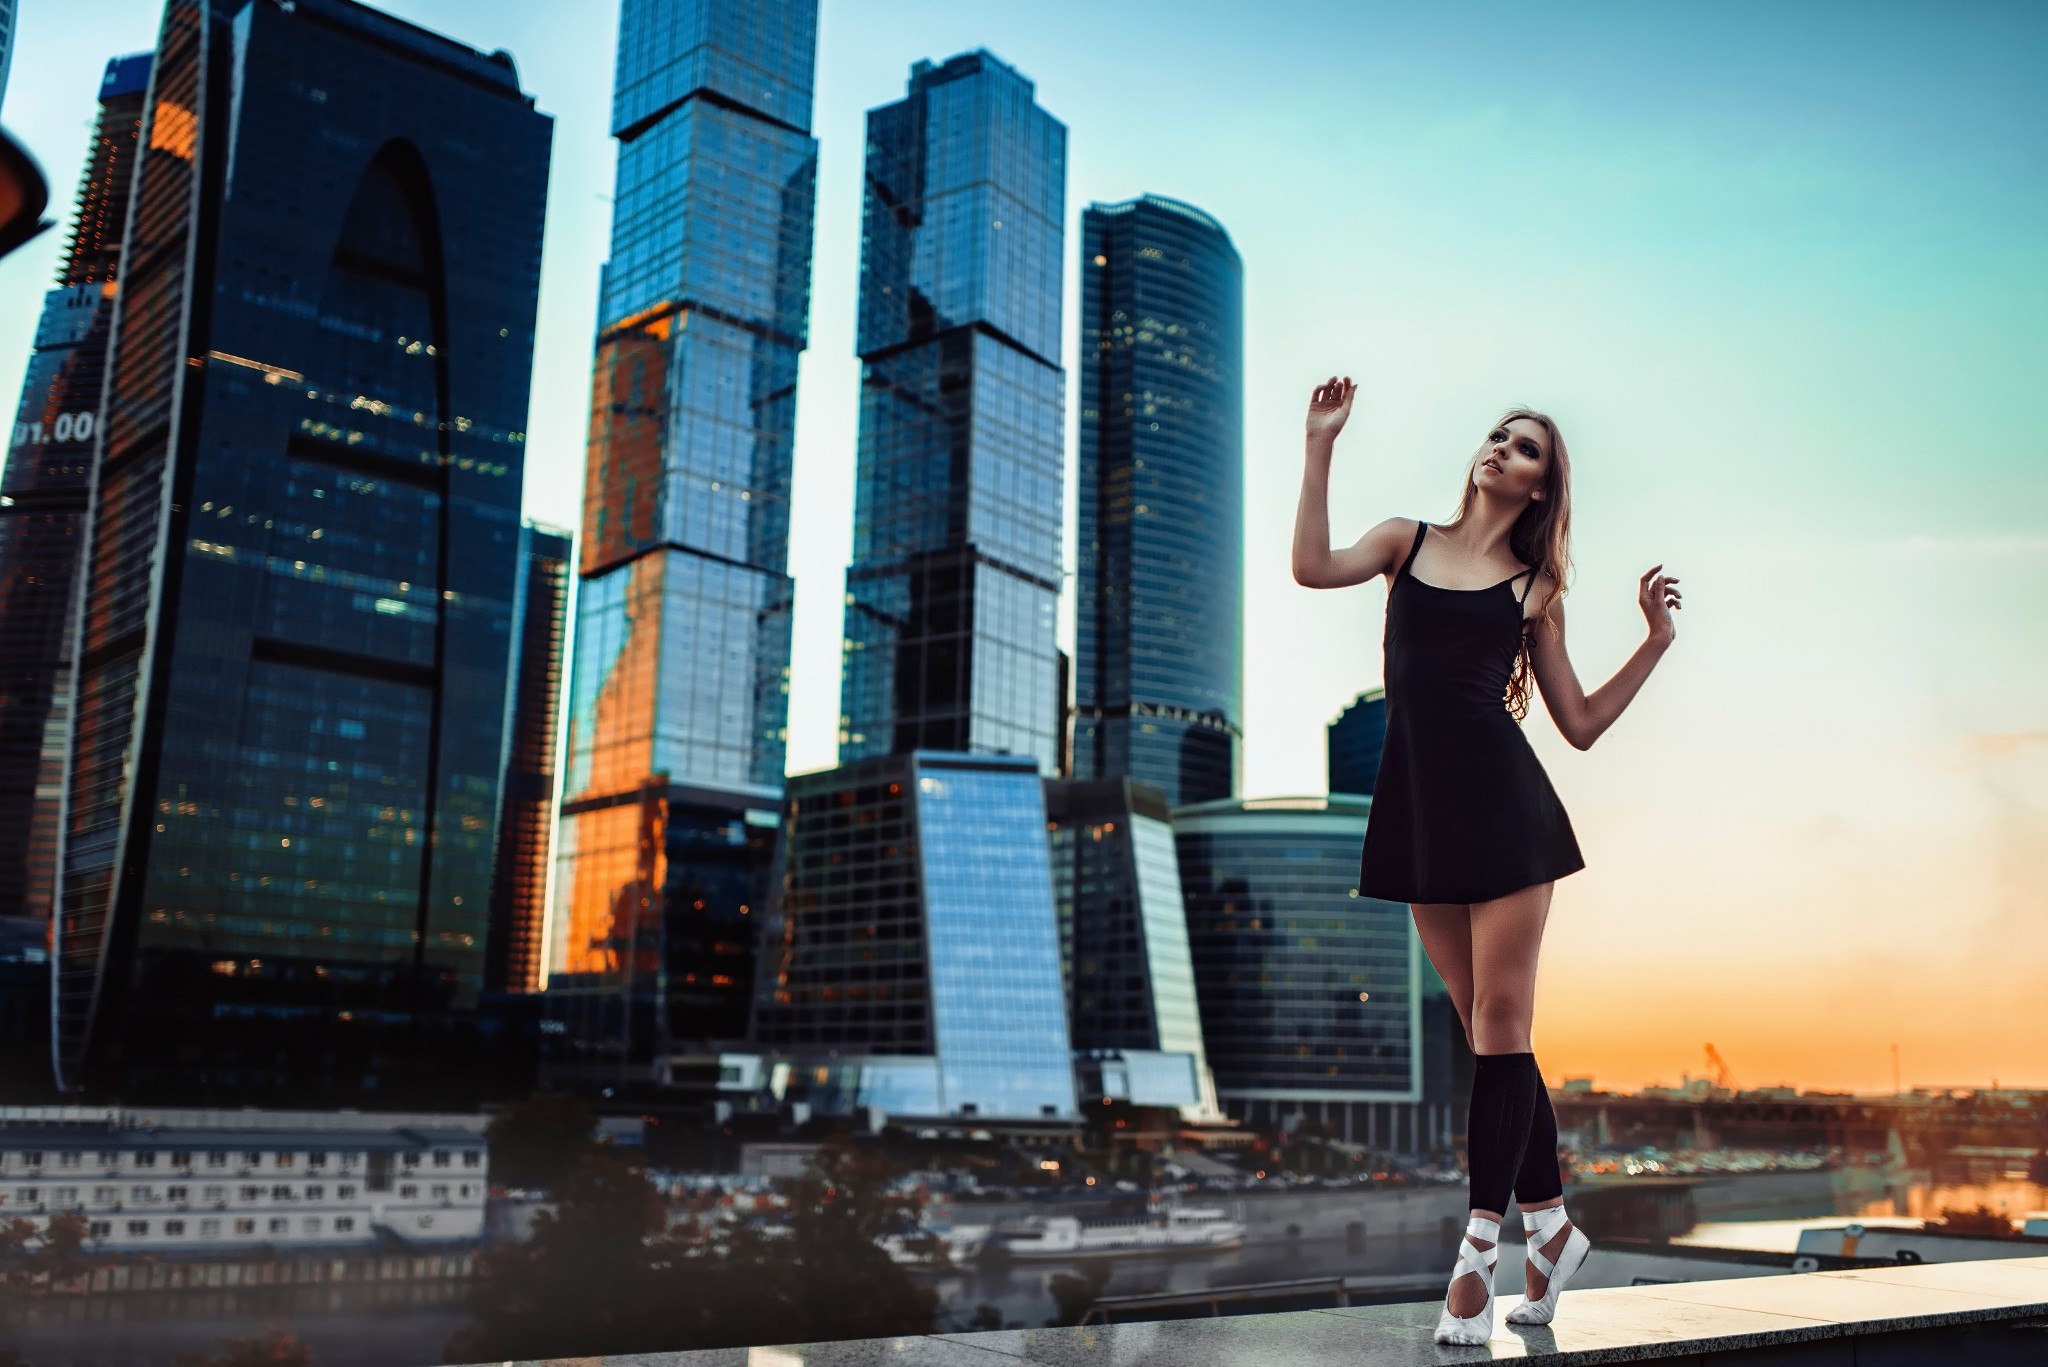 Wallpapers woman city Moscow on the desktop